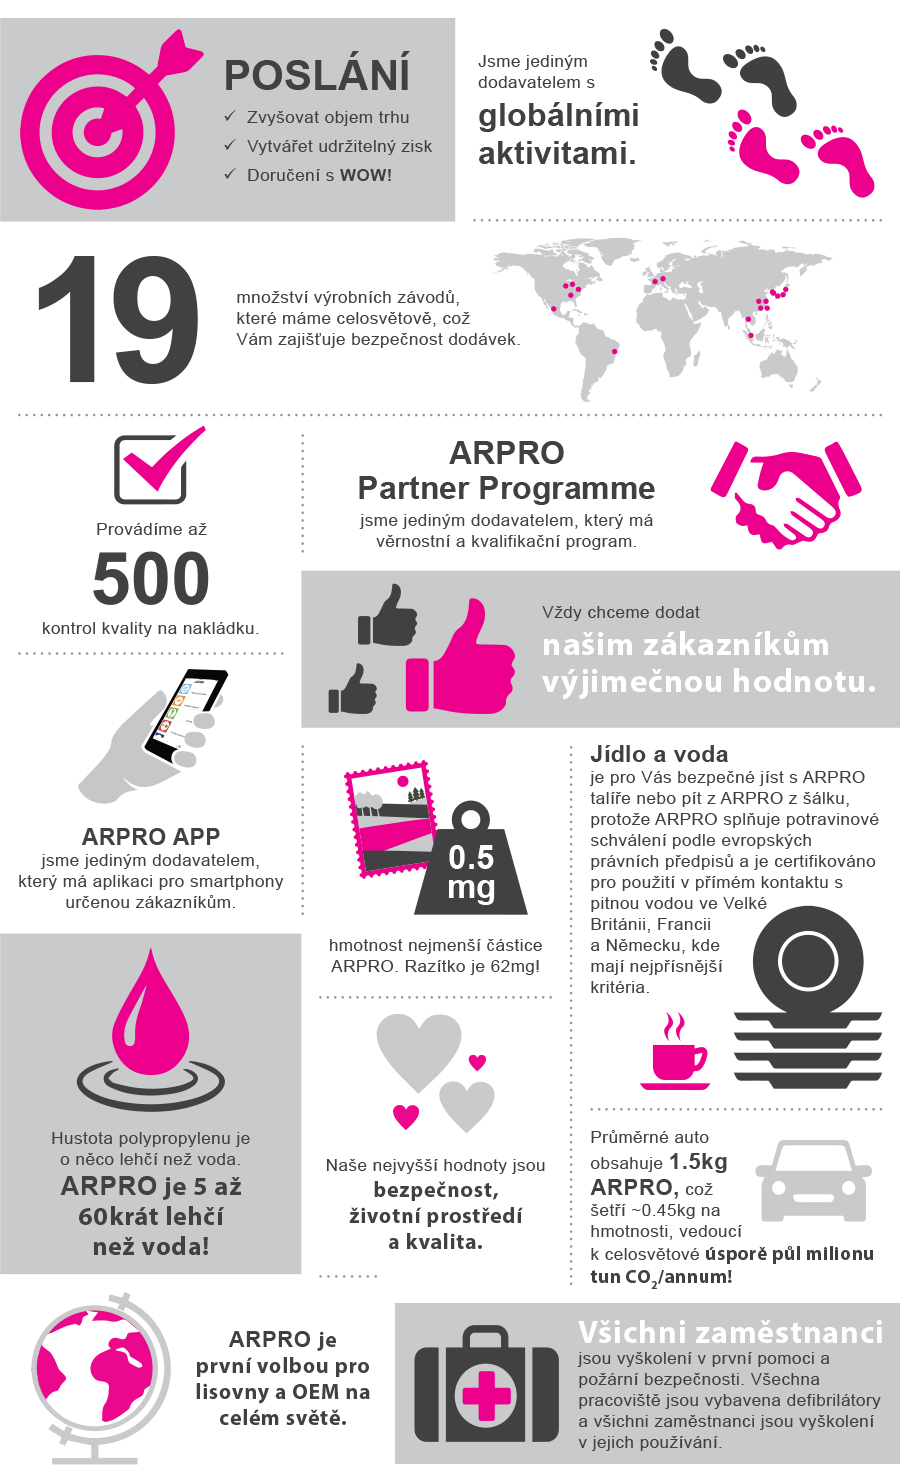 Infographic containing facts about ARPRO such as; 8 Billion is the amount of ARPRO particles you can get in a truck. There are only 7 billion people on the planet. 